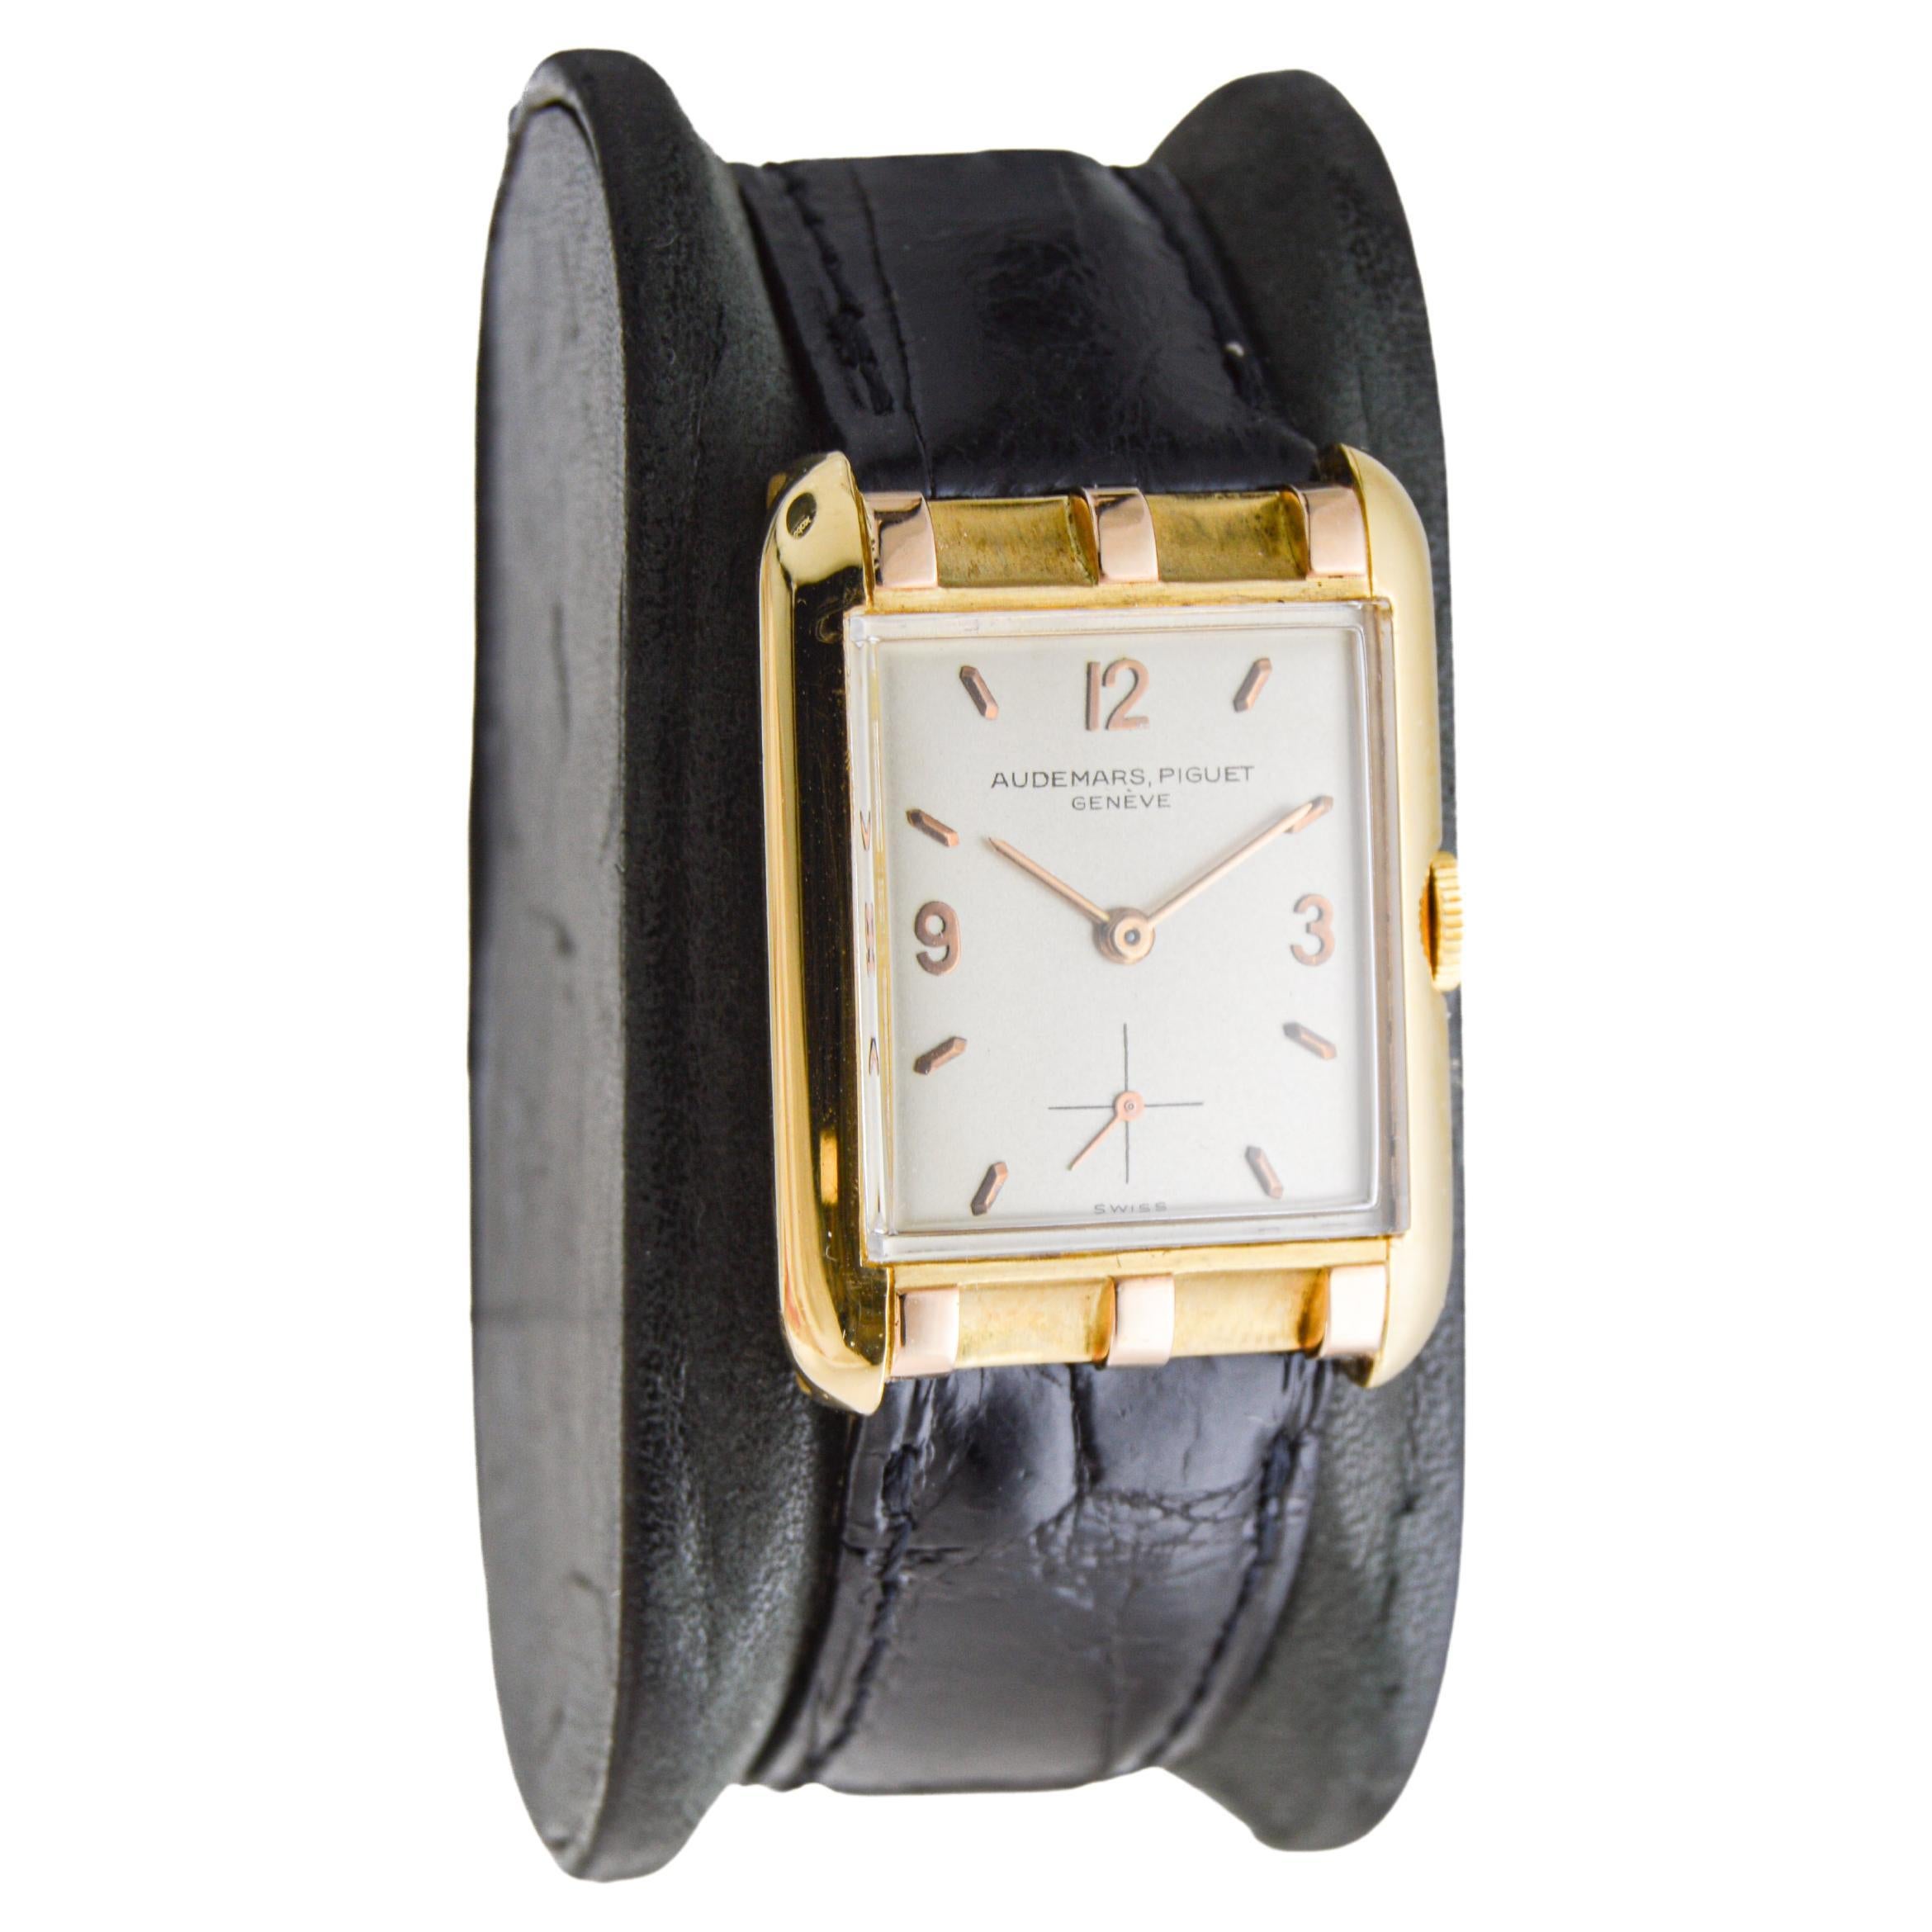 FACTORY / HOUSE: Audemars Piguet Watch Company
STYLE / REFERENCE: Art Deco / Tank Style 
METAL / MATERIAL: 18Kt. Gold Two Tone Yellow & Rose 
DIMENSIONS: Length 34mm  X Width 25mm
CIRCA: 1940's
MOVEMENT / CALIBER: Manual Winding / 18 Jewels /